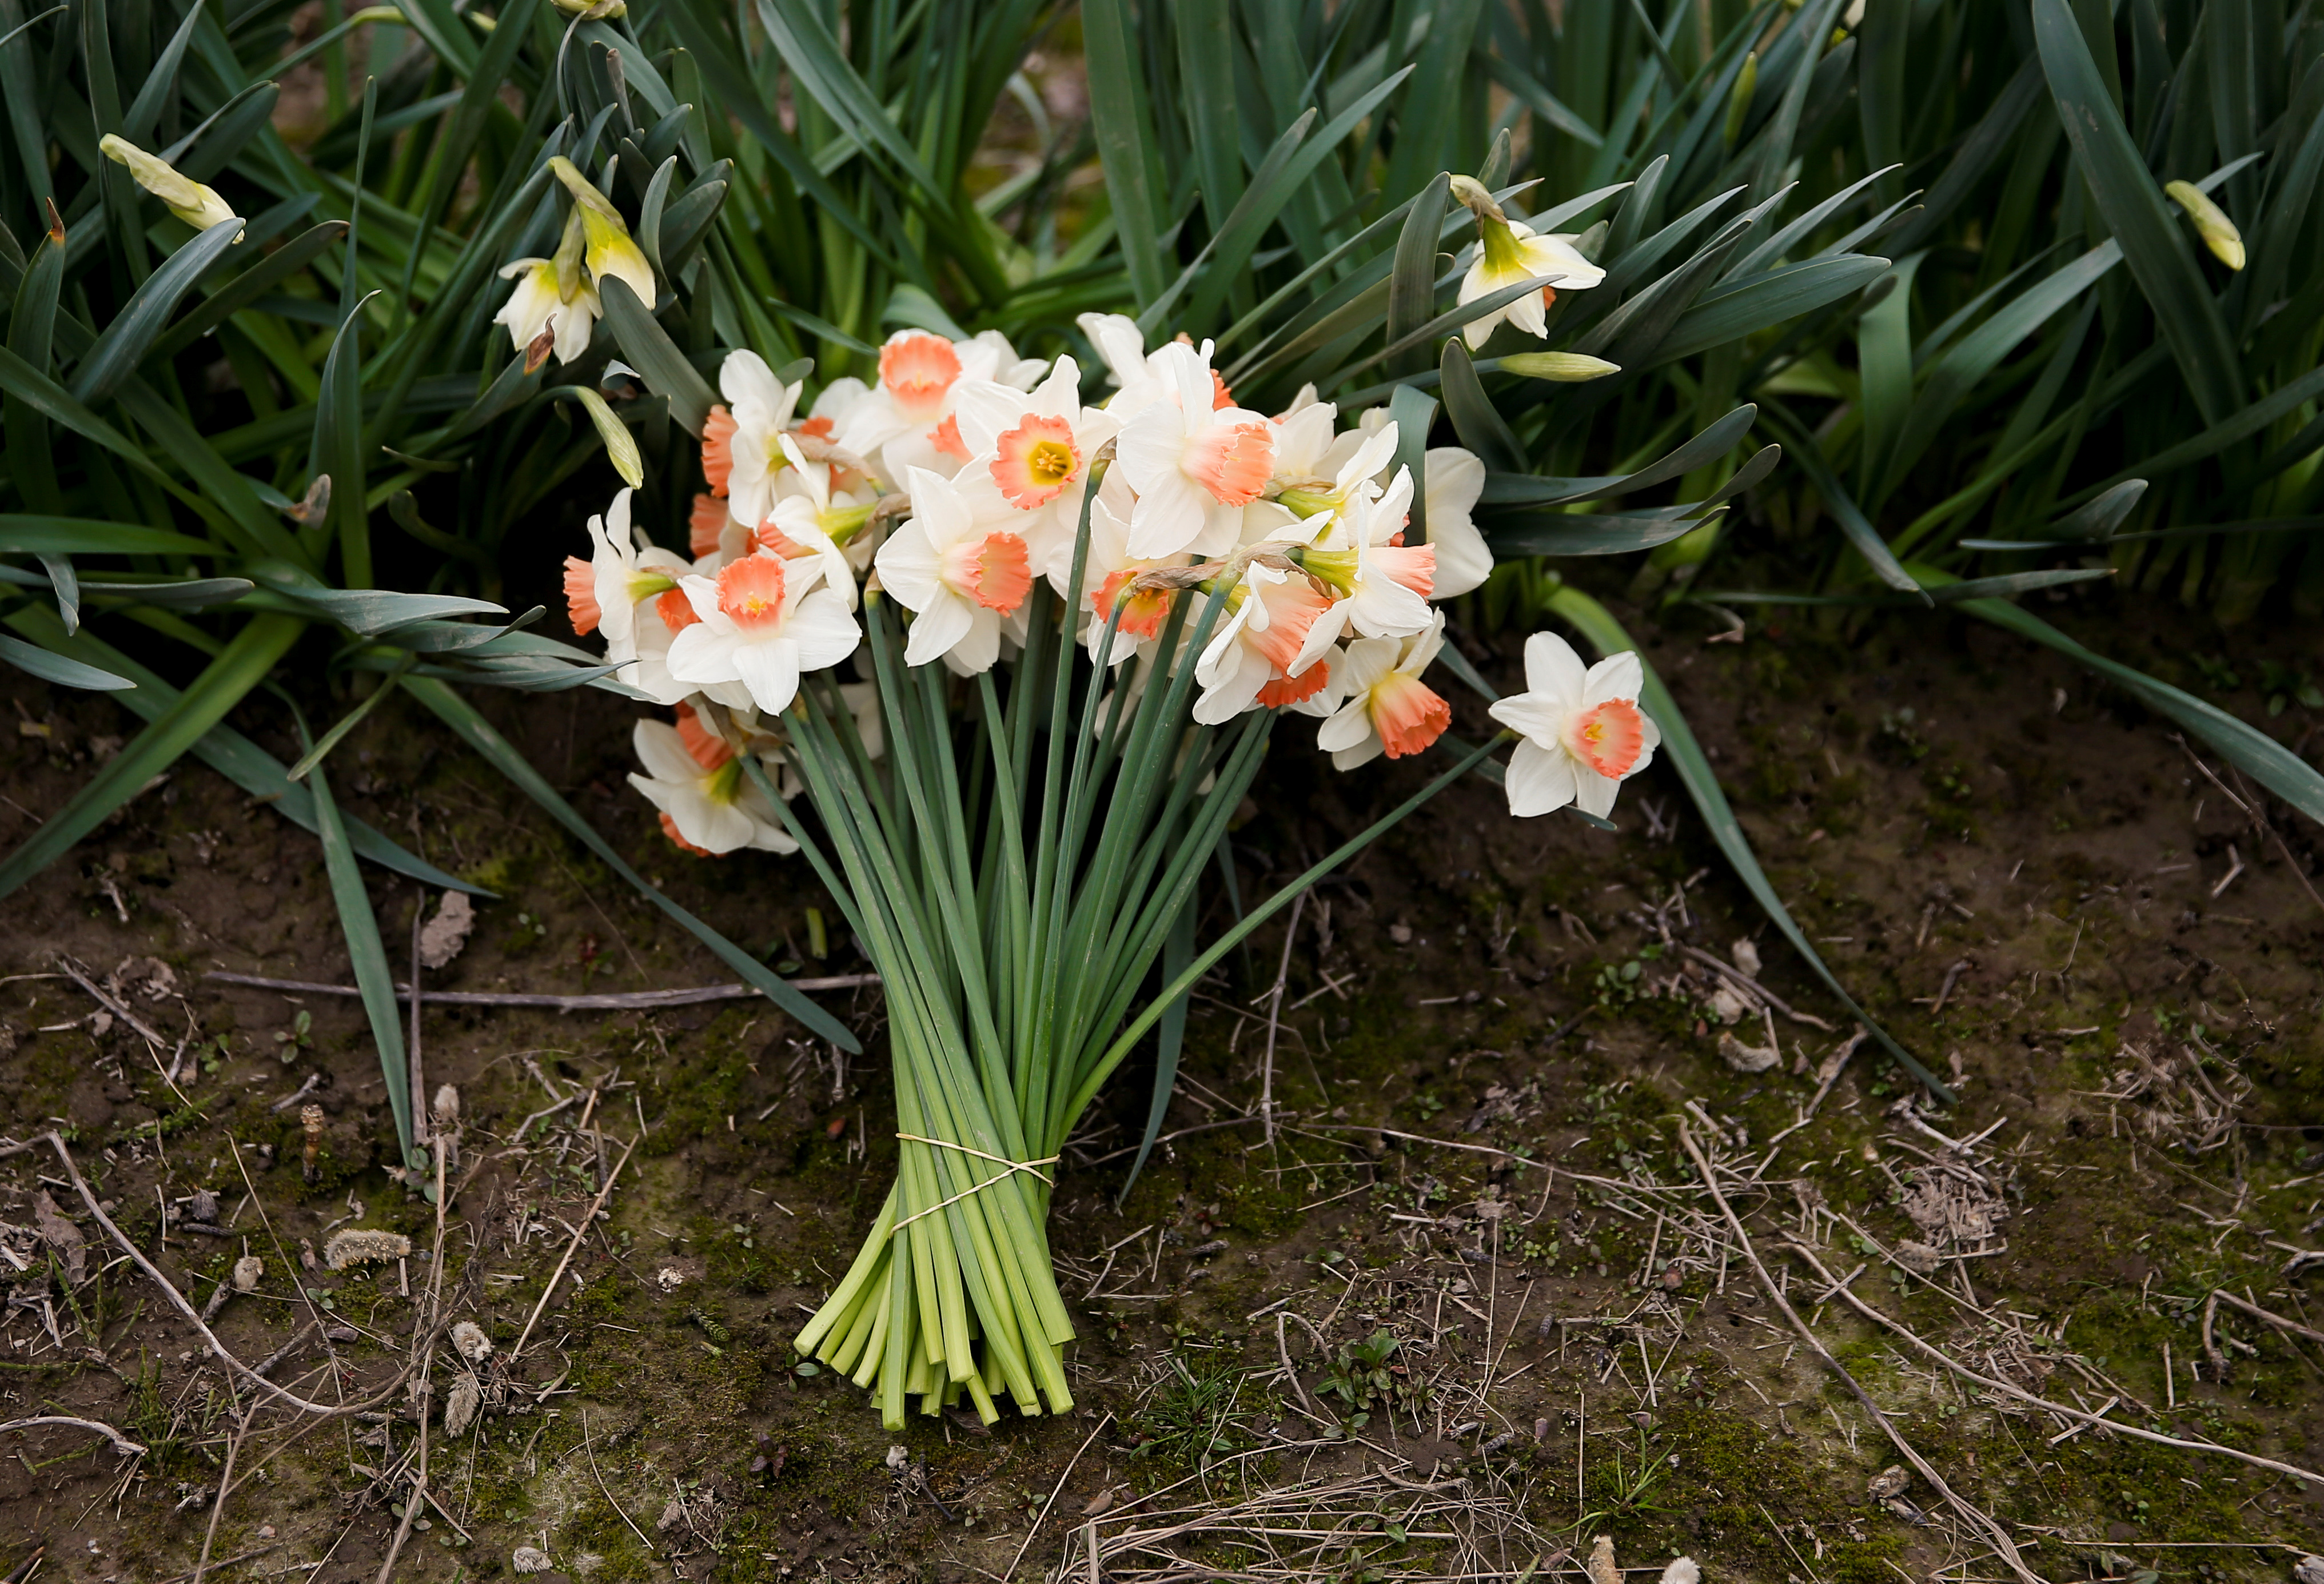 A bouquet of daffodils picked by co-owner Clarita Santos at Santos Farm, which has been affected by the temporary closure of the flower stalls at Seattle's Pike Place Market during the coronavirus disease (COVID-19) outbreak in Kent, Washington, U.S. Marc